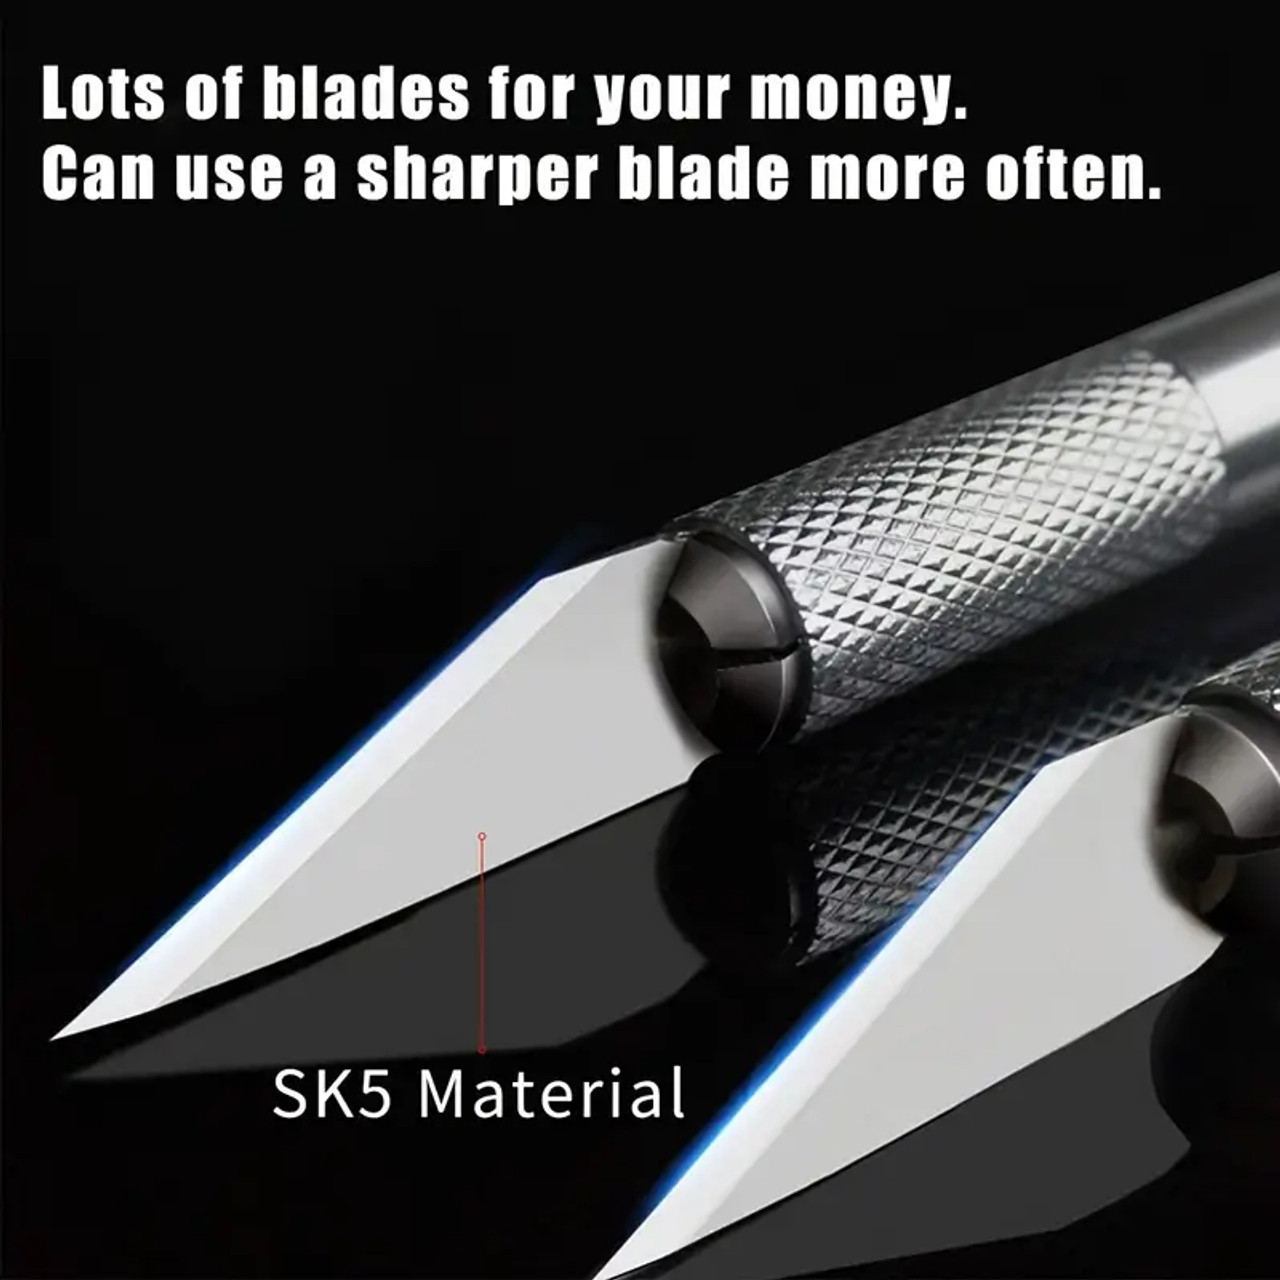 How to Secure a Blade in an X-Acto Knife